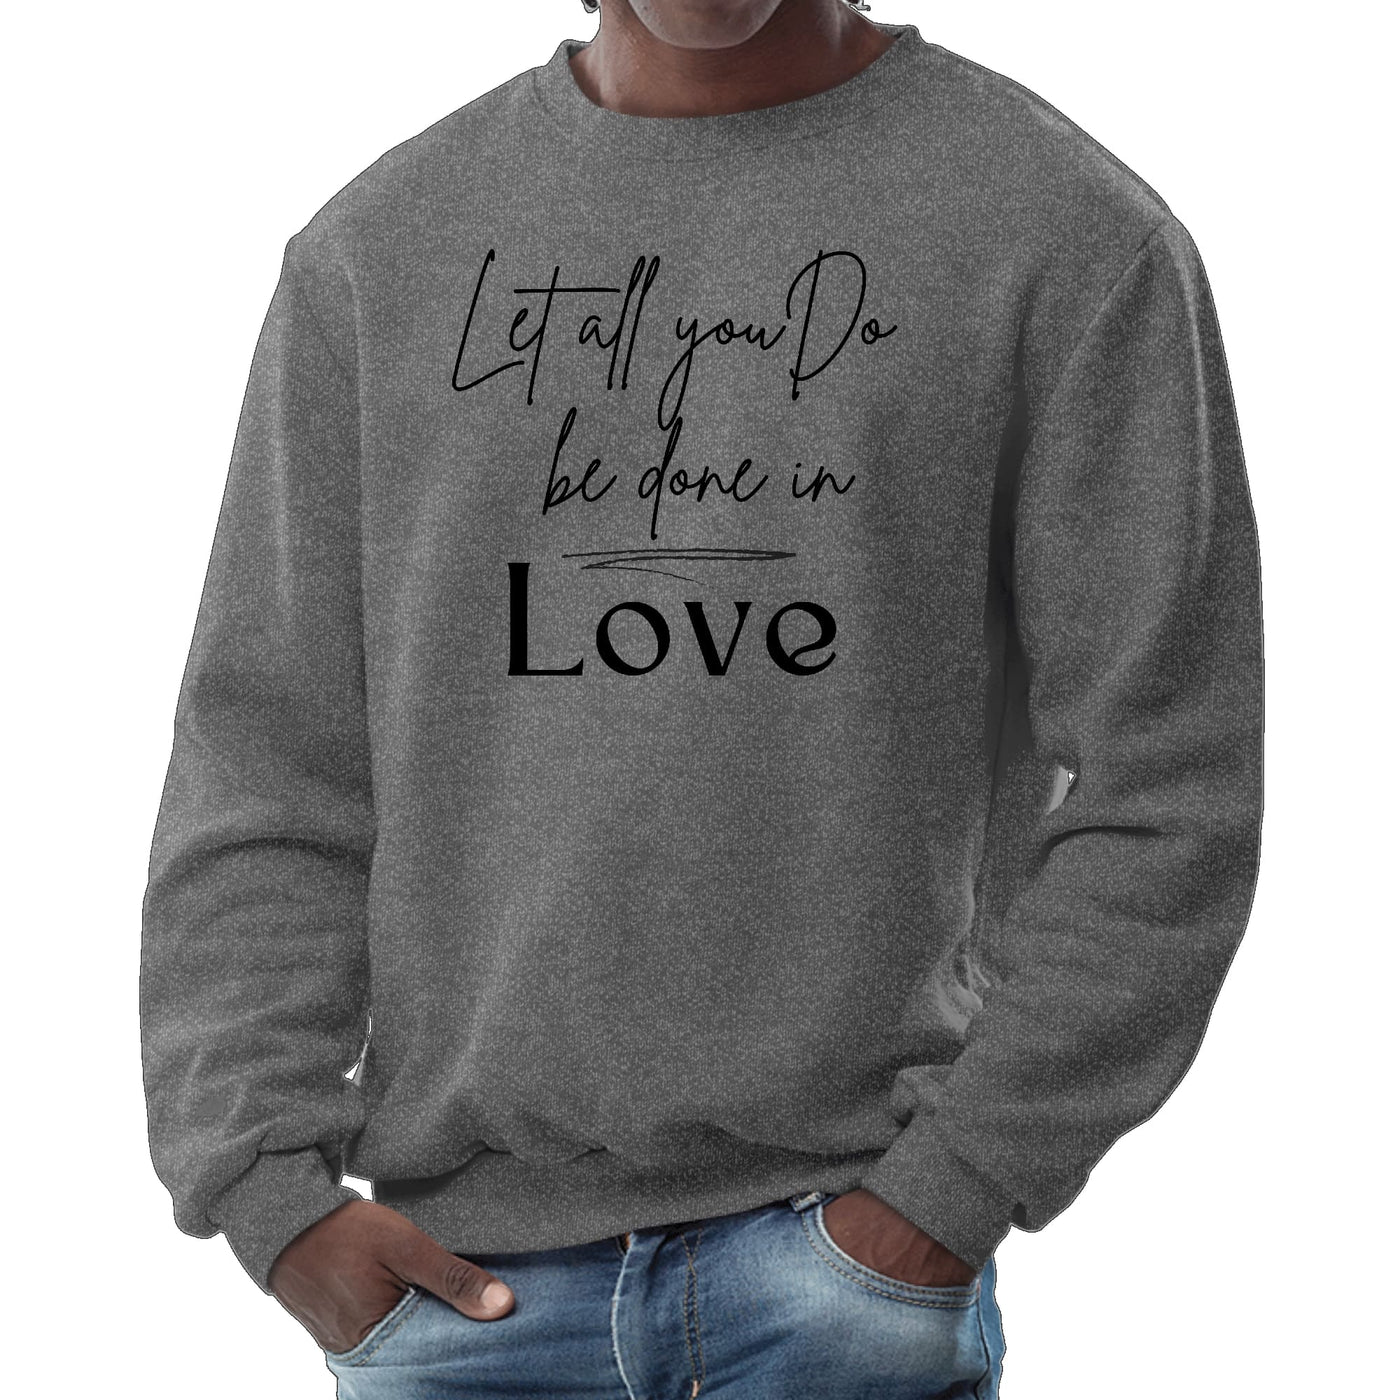 Mens Graphic Sweatshirt Let All You Do Be Done In Love Black - Mens